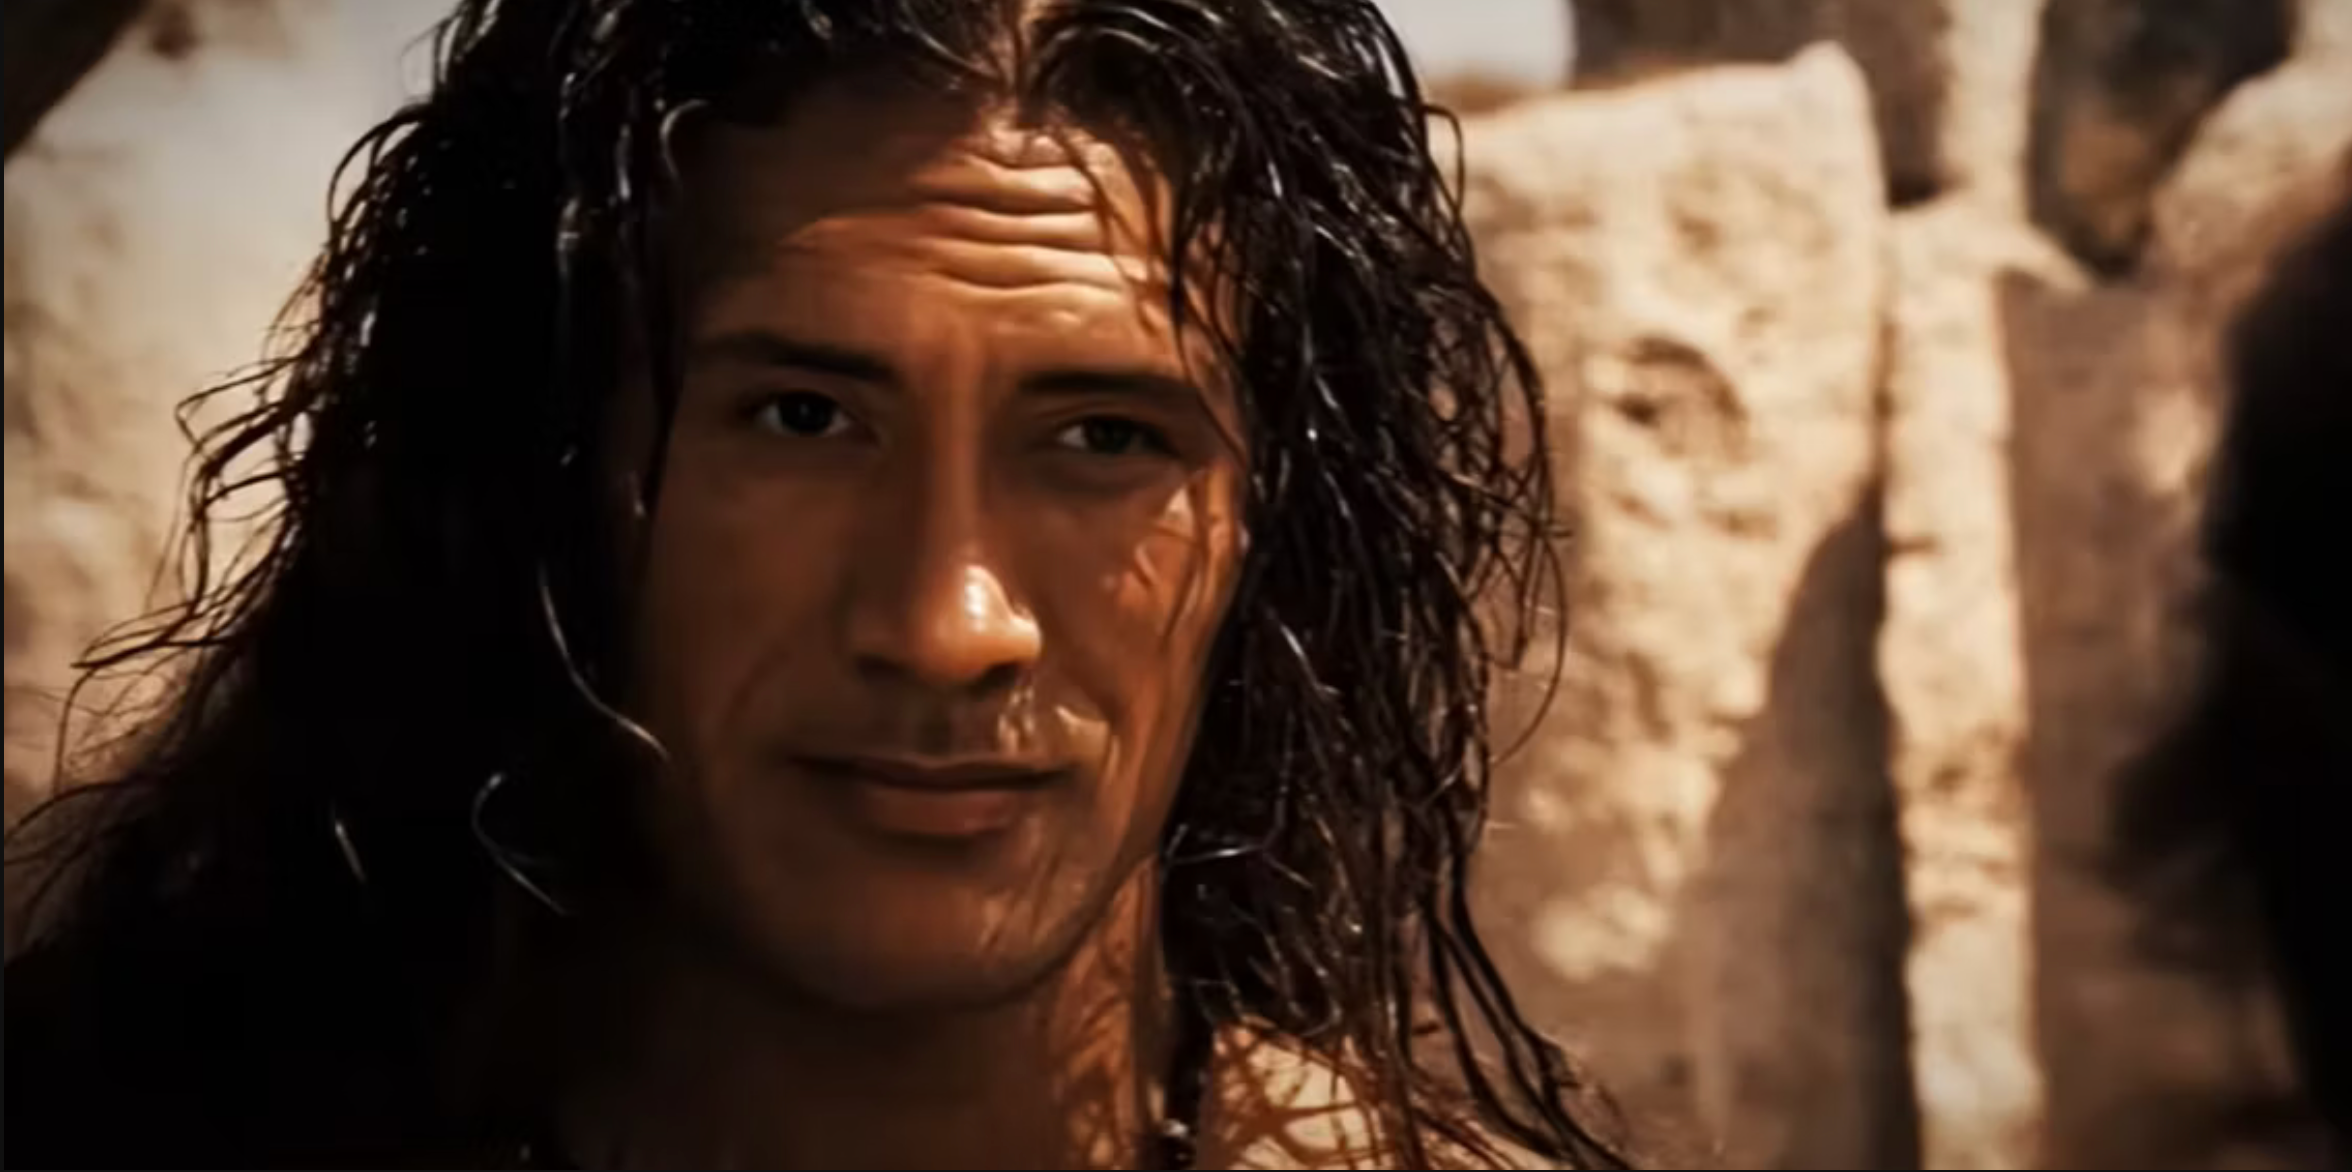 Dwayne Johnson and Zendaya Bring Moana to Life in Live Action Fan Made Trailer